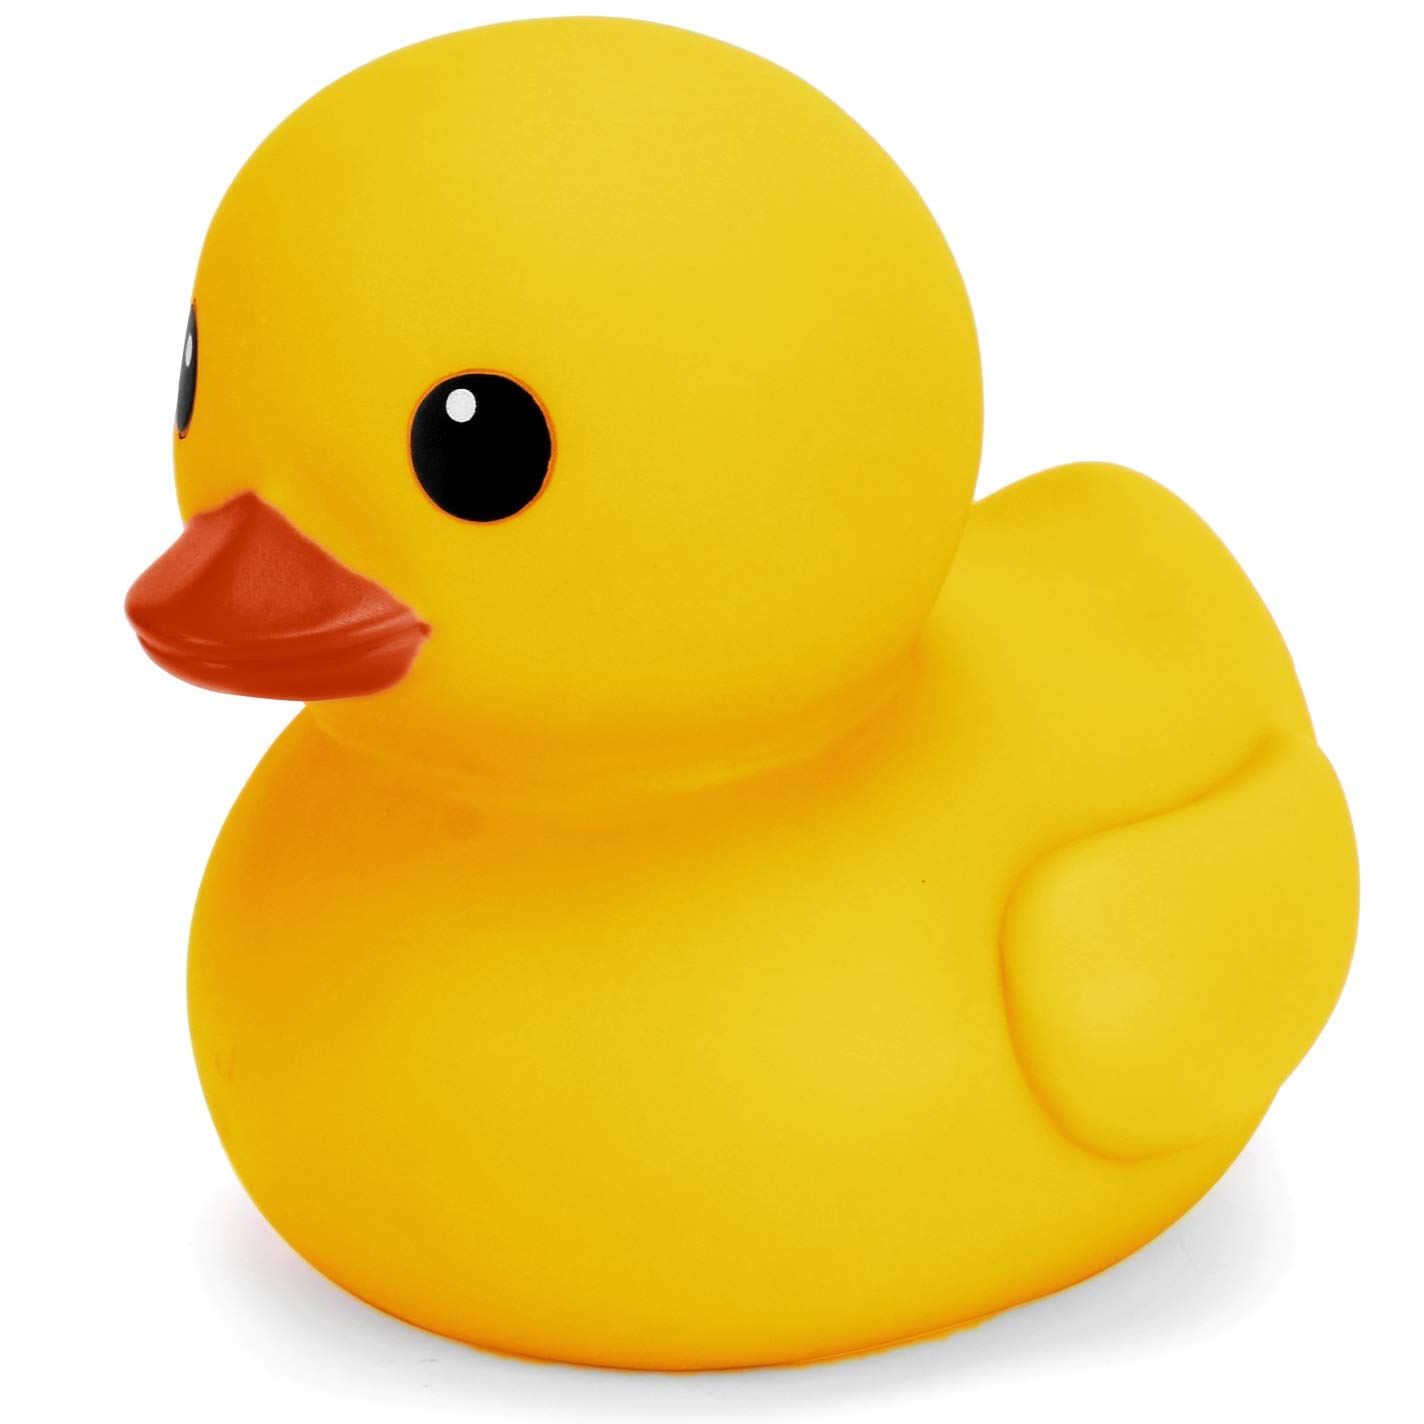 steam-community-guide-placid-plastic-duck-simulator-guide-for-dummies